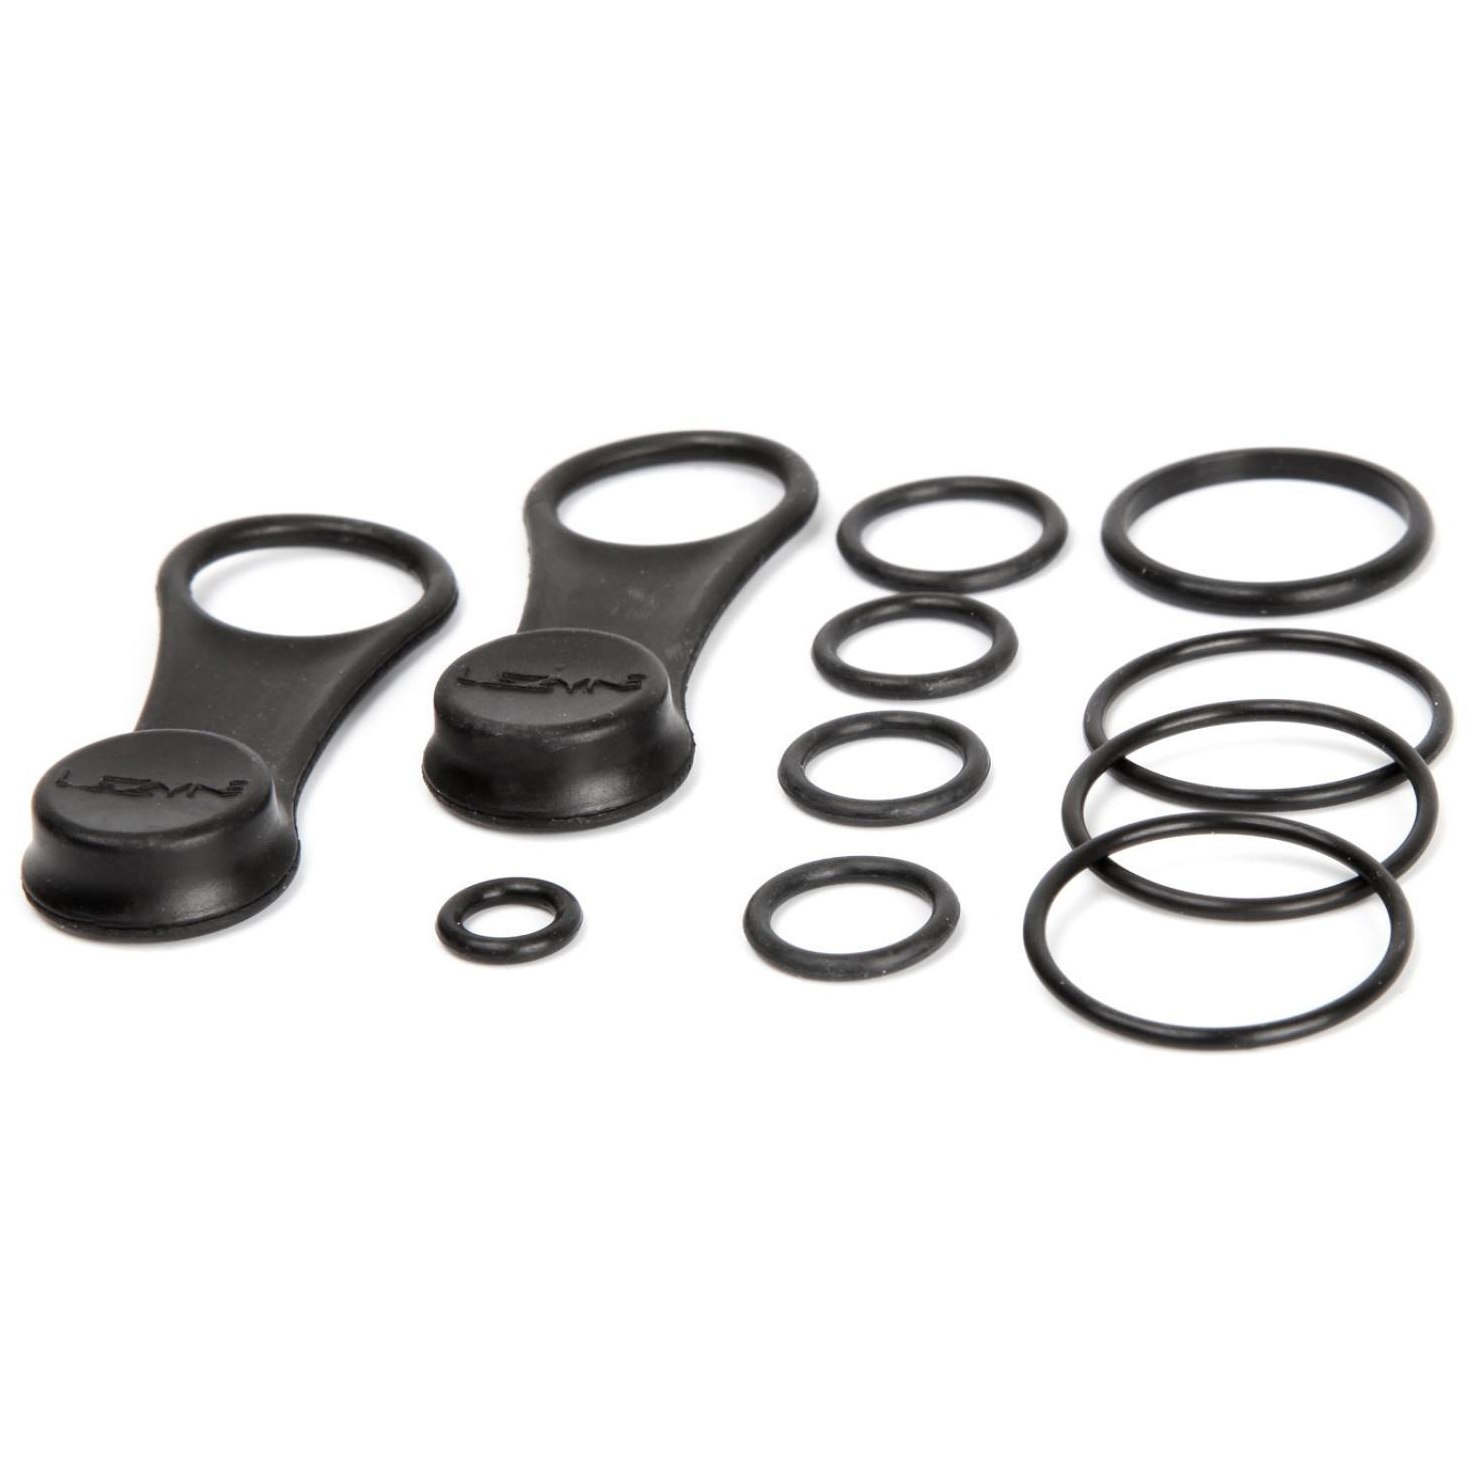 Picture of Lezyne Seal Kit for Pressure Drive Pump